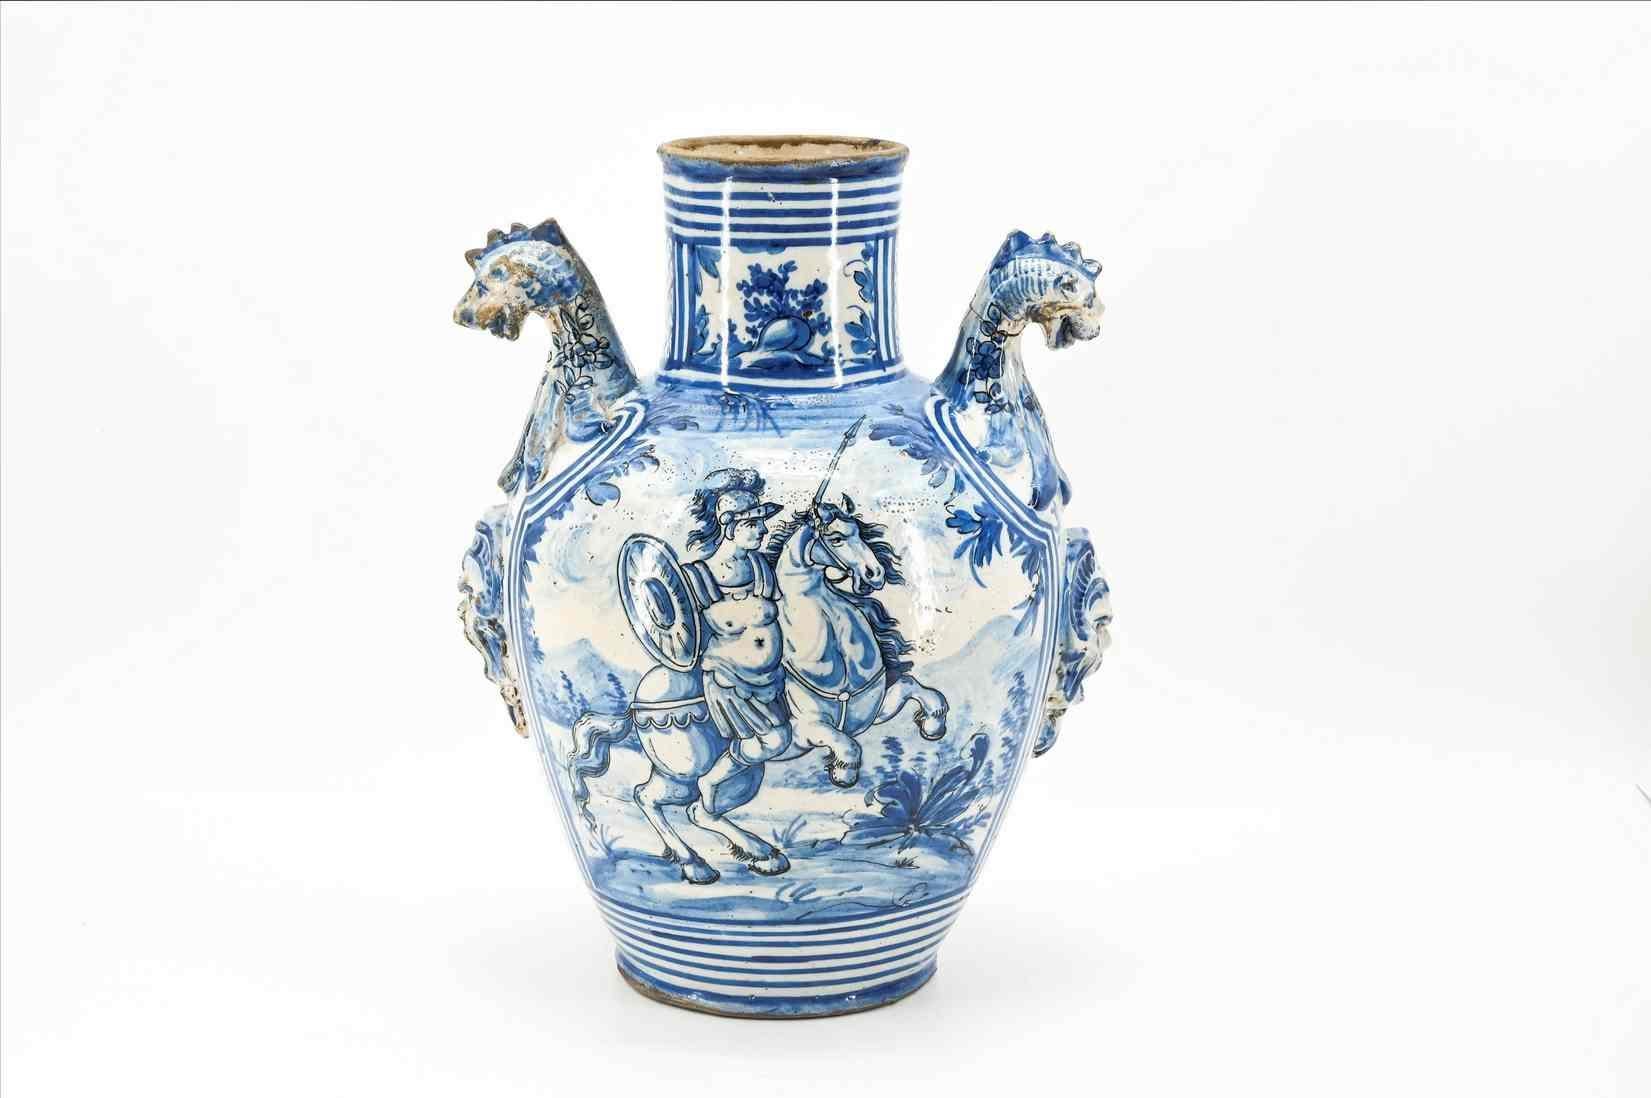 Large and important pair of vases from the Savona factory. Both vases have side handles ending in dragons. The reserves on the side are decorated with figurative scenes and architectural veduttes. They have slight knocks due to the enamel and the